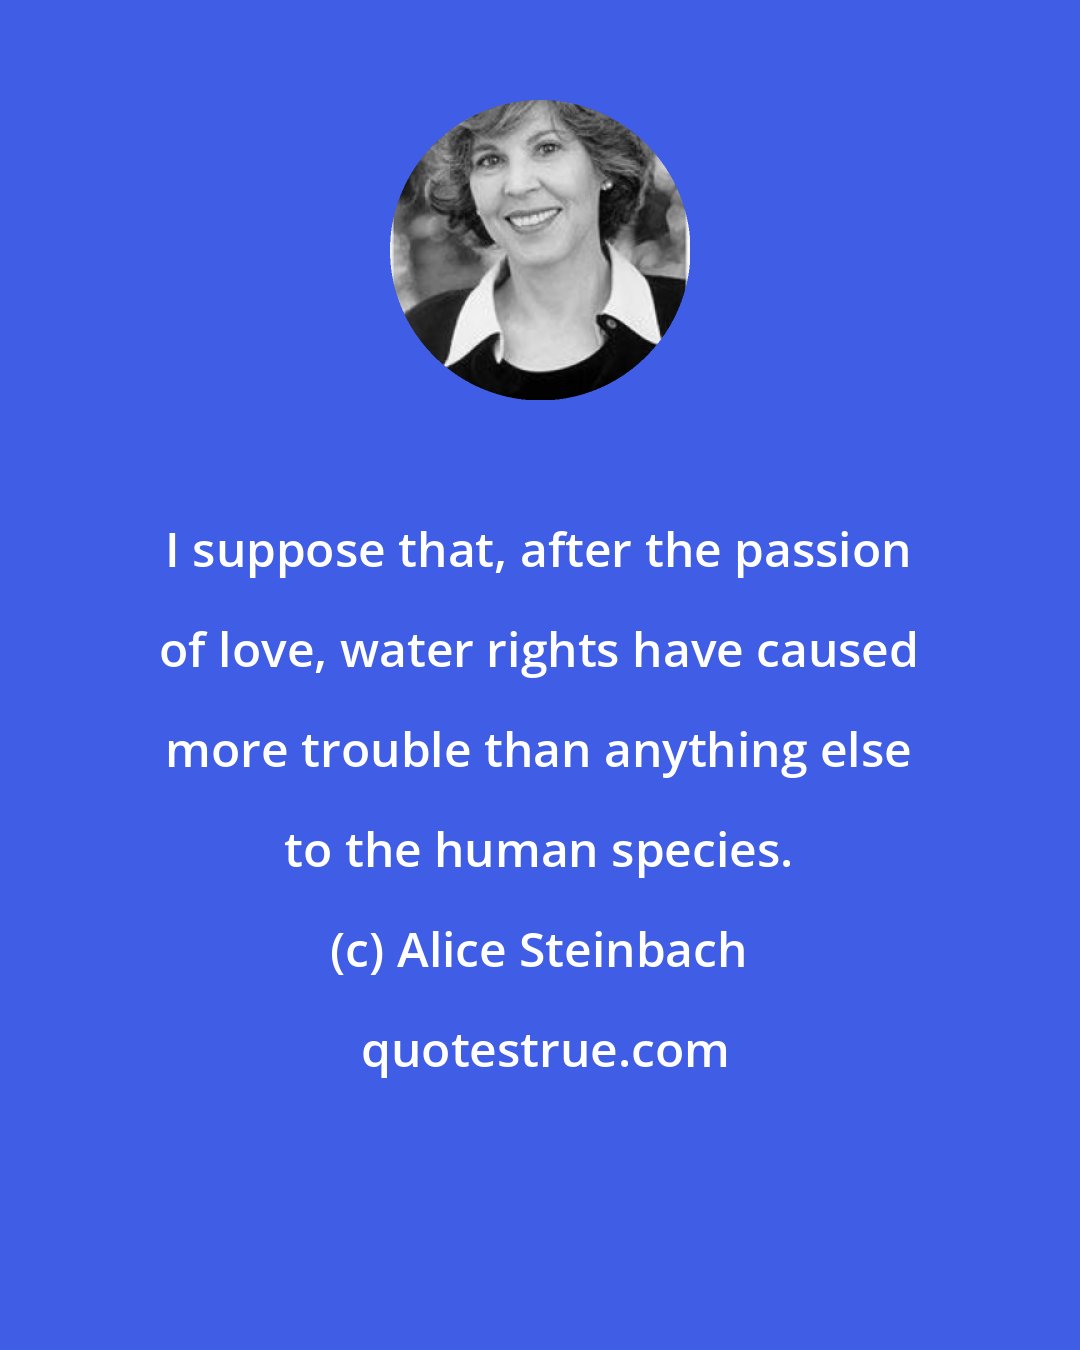 Alice Steinbach: I suppose that, after the passion of love, water rights have caused more trouble than anything else to the human species.